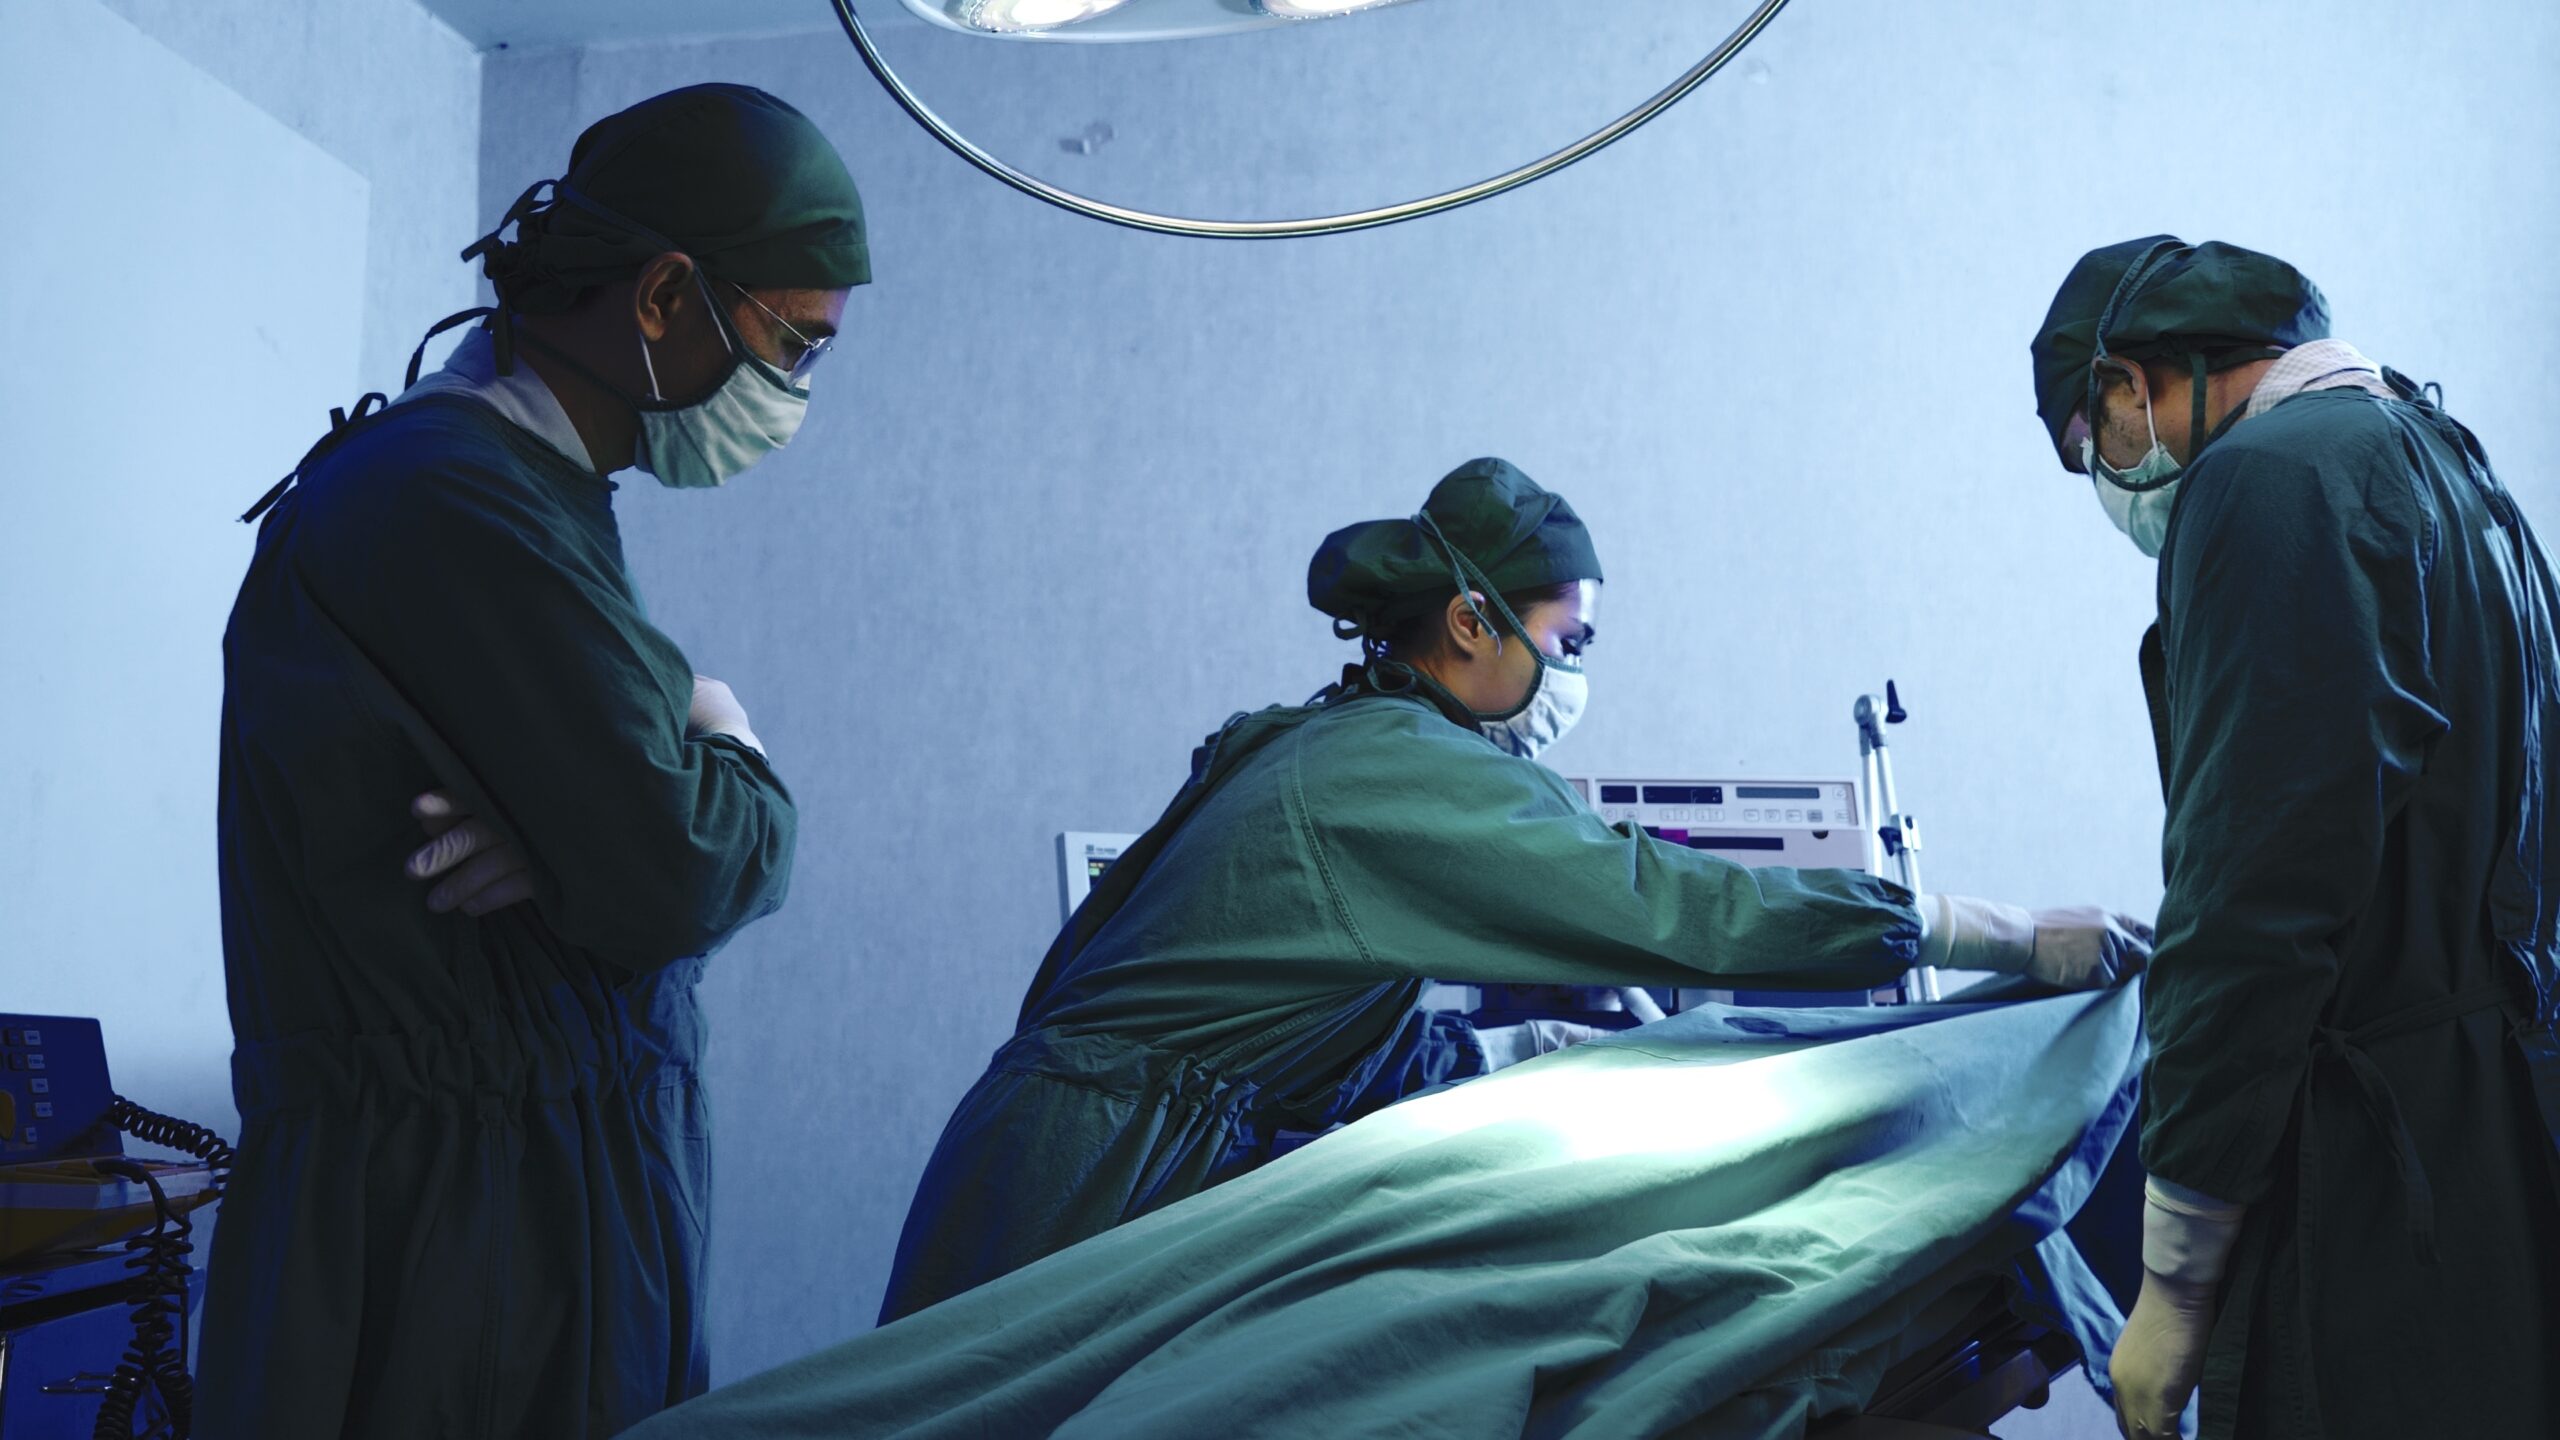 Surgeon covering a patient that died during surgery with a sheet. Two other doctors look on, sad